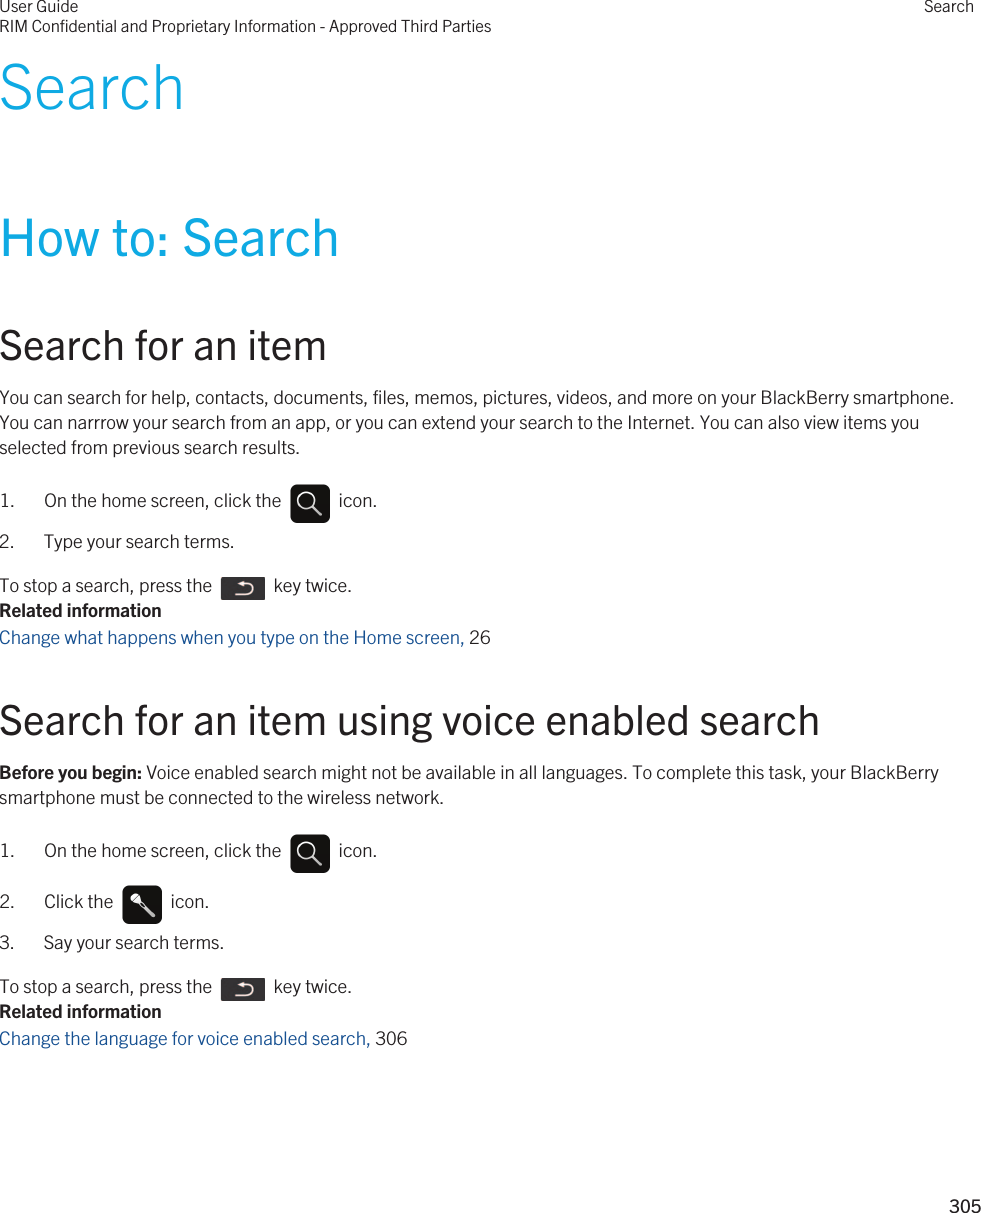 SearchHow to: SearchSearch for an itemYou can search for help, contacts, documents, files, memos, pictures, videos, and more on your BlackBerry smartphone. You can narrrow your search from an app, or you can extend your search to the Internet. You can also view items you selected from previous search results.1.  On the home screen, click the    icon. 2. Type your search terms.To stop a search, press the    key twice.Related informationChange what happens when you type on the Home screen, 26 Search for an item using voice enabled searchBefore you begin: Voice enabled search might not be available in all languages. To complete this task, your BlackBerry smartphone must be connected to the wireless network.1.  On the home screen, click the    icon. 2.  Click the    icon. 3. Say your search terms.To stop a search, press the    key twice.Related informationChange the language for voice enabled search, 306User GuideRIM Confidential and Proprietary Information - Approved Third PartiesSearch305 